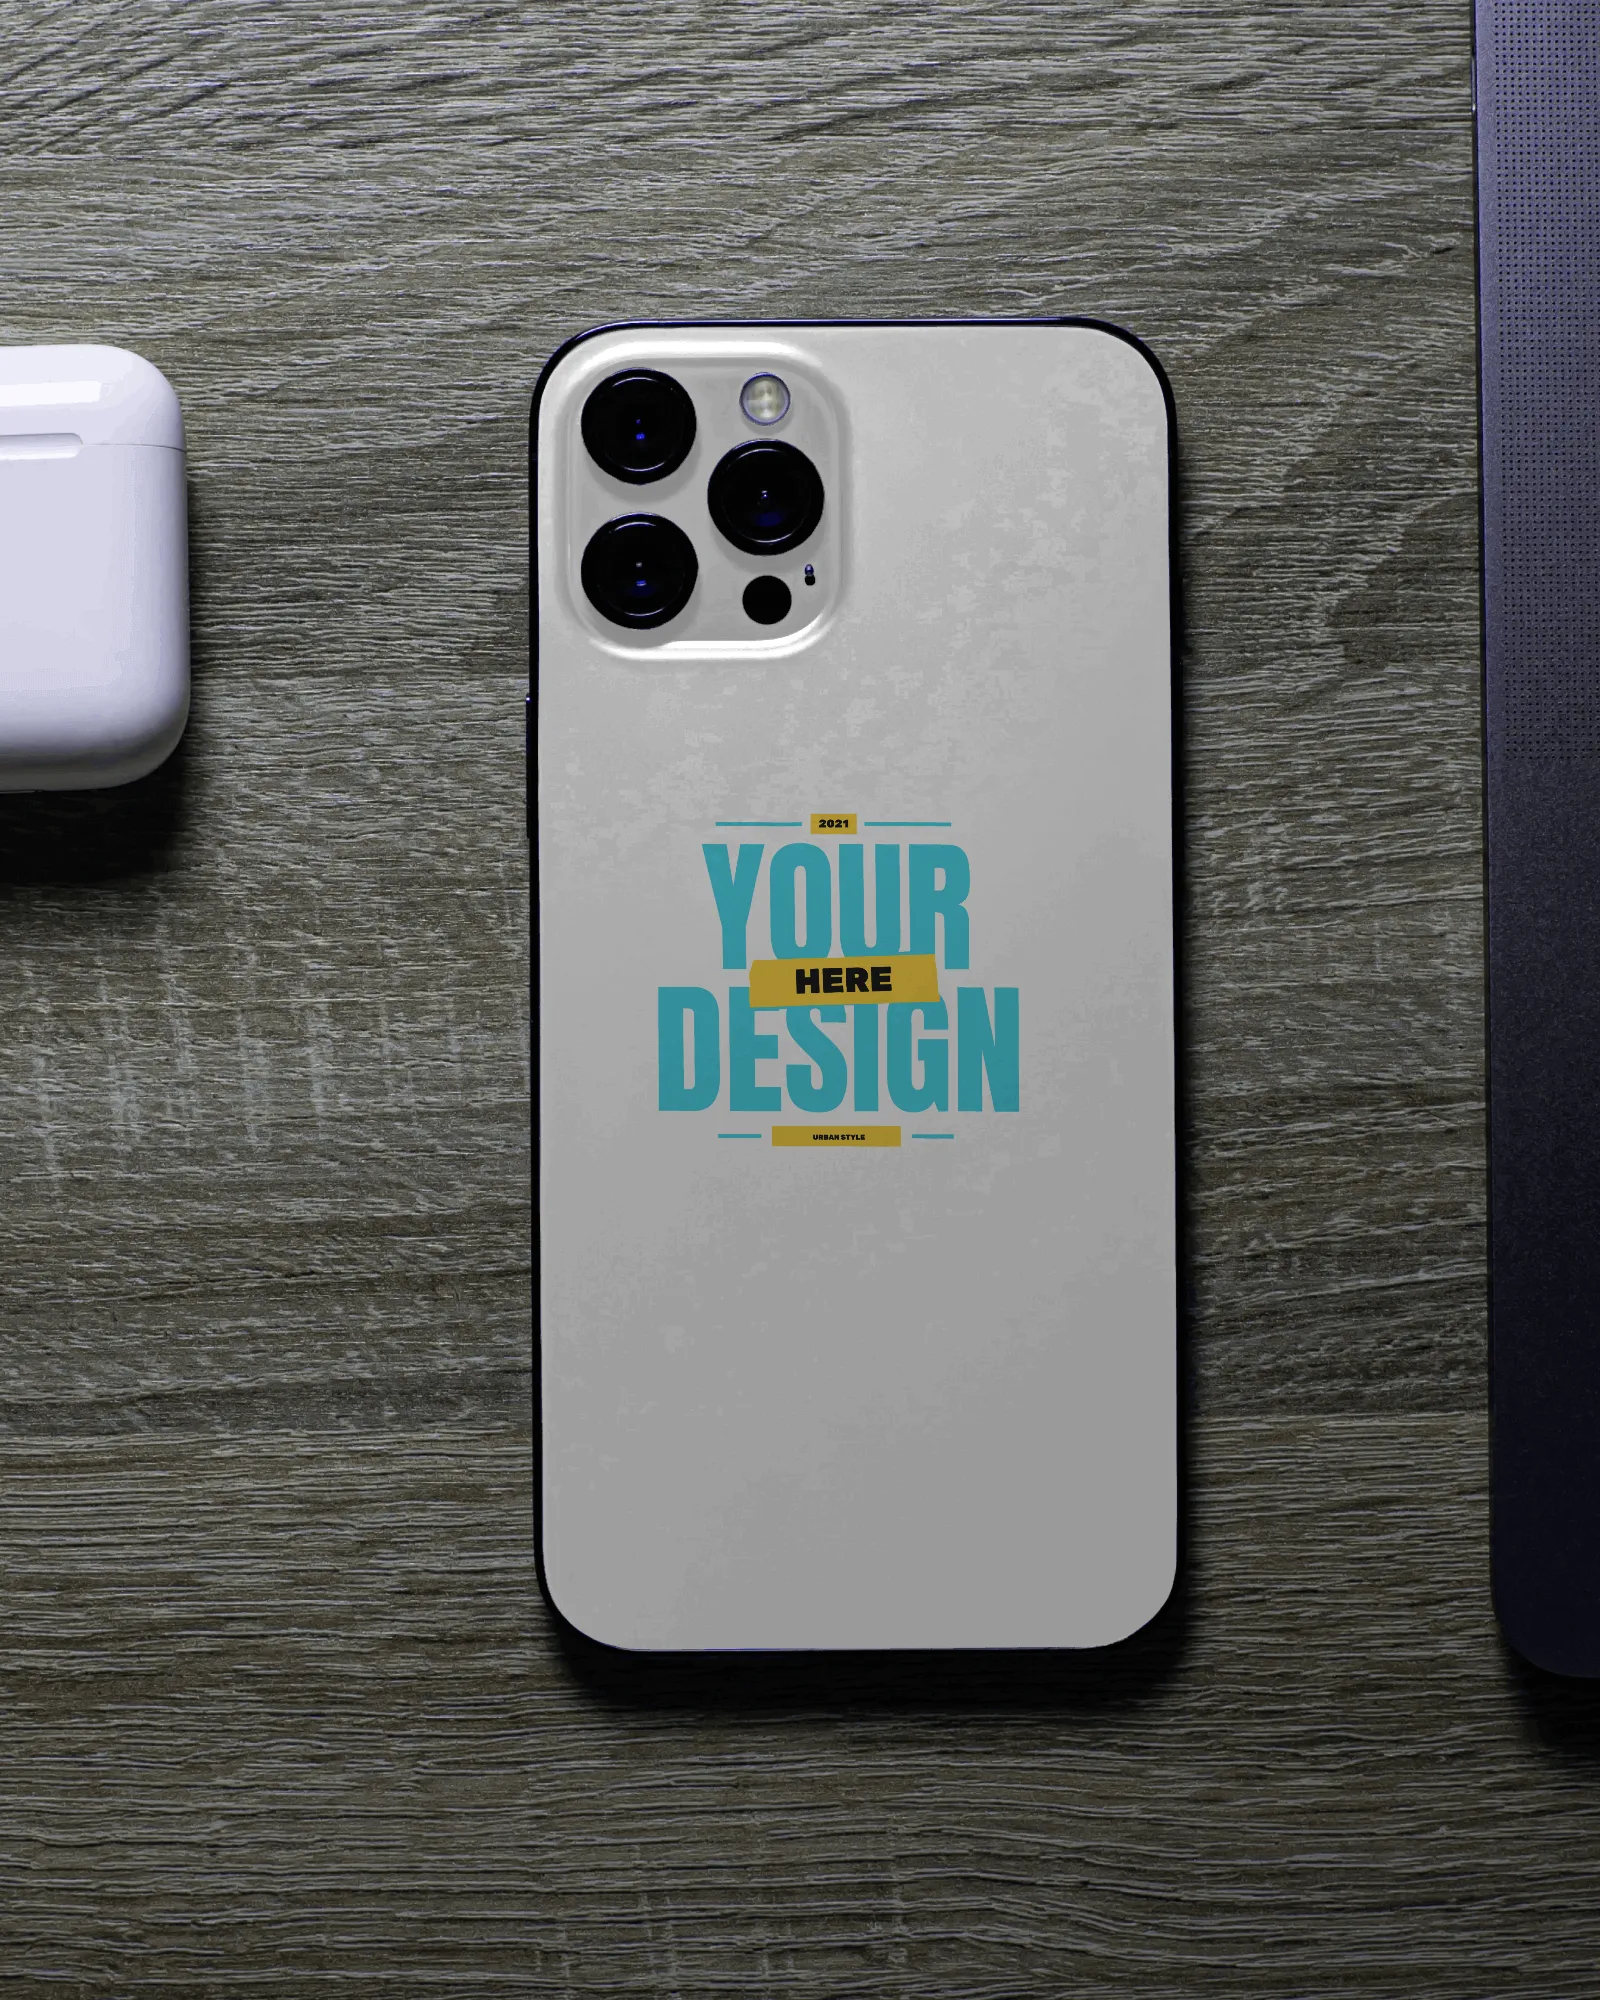 iPhone case mockup template free